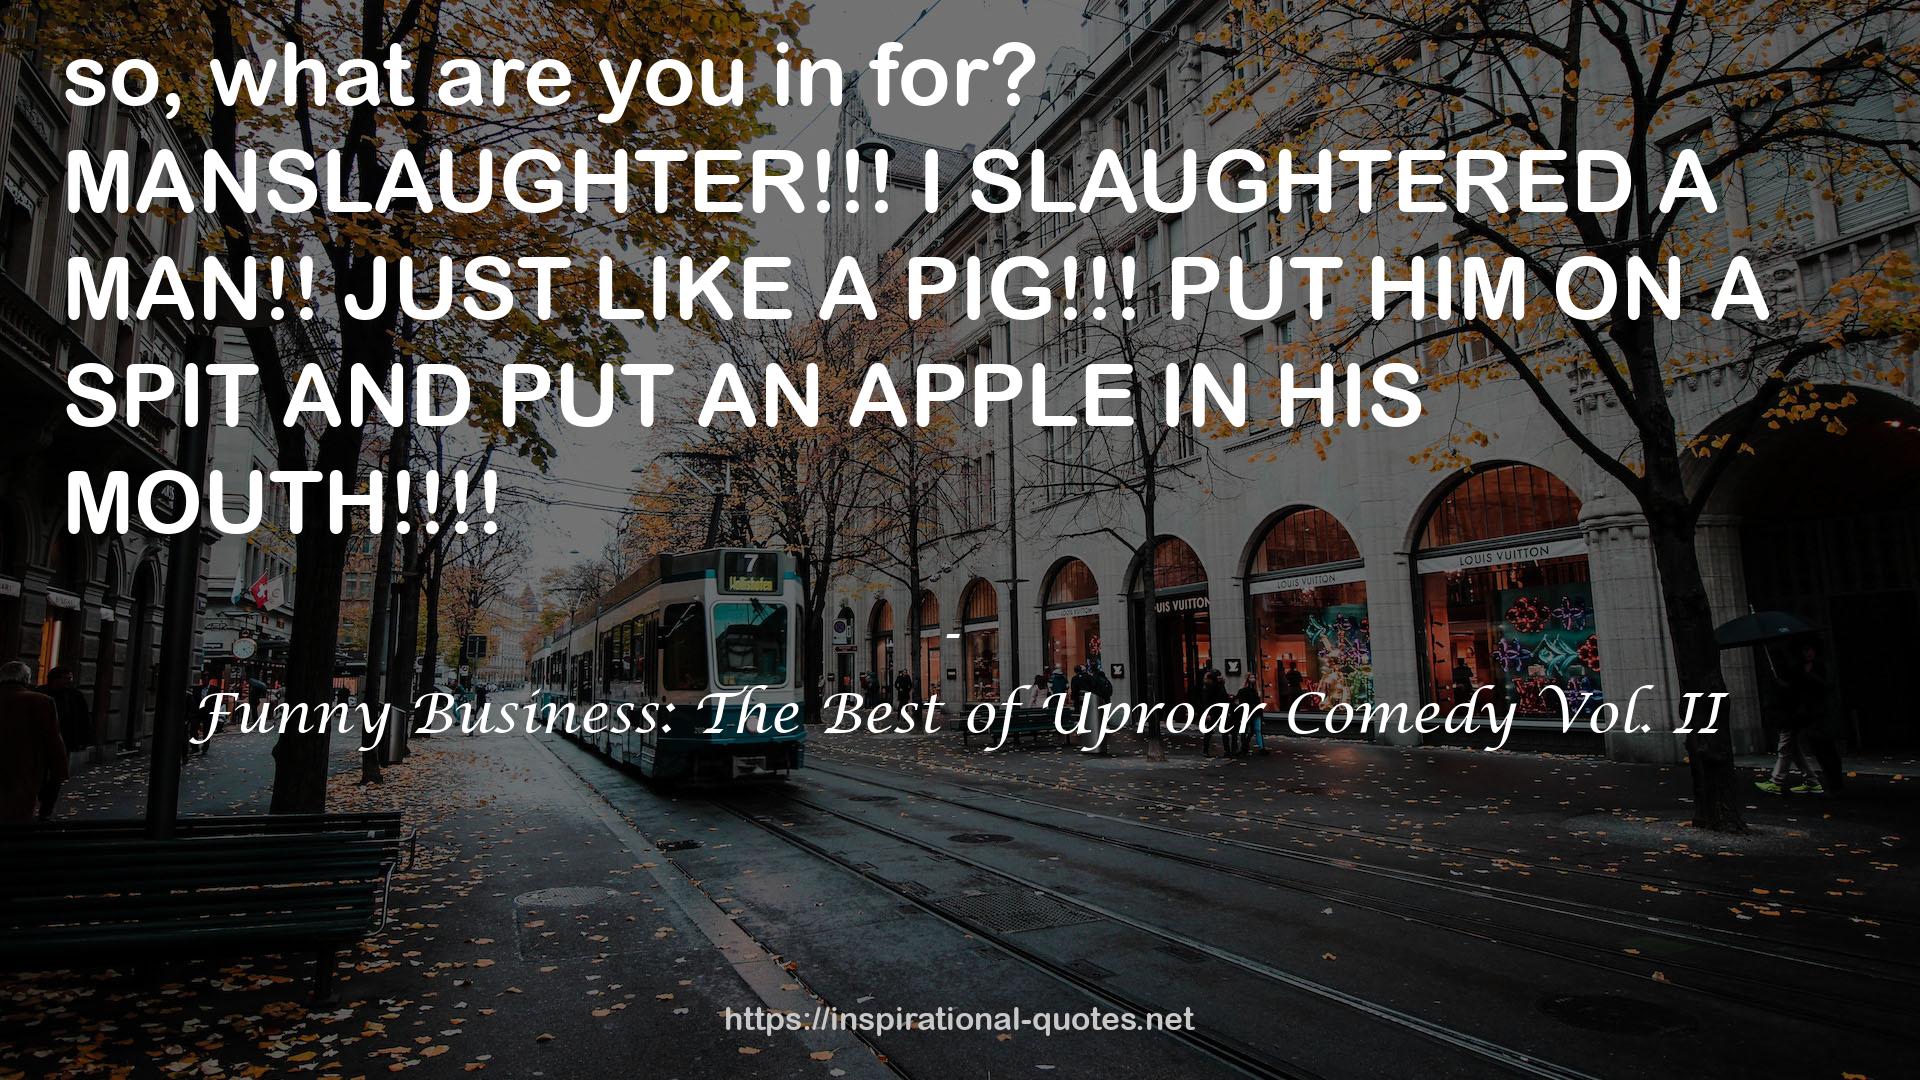 Funny Business: The Best of Uproar Comedy Vol. II QUOTES